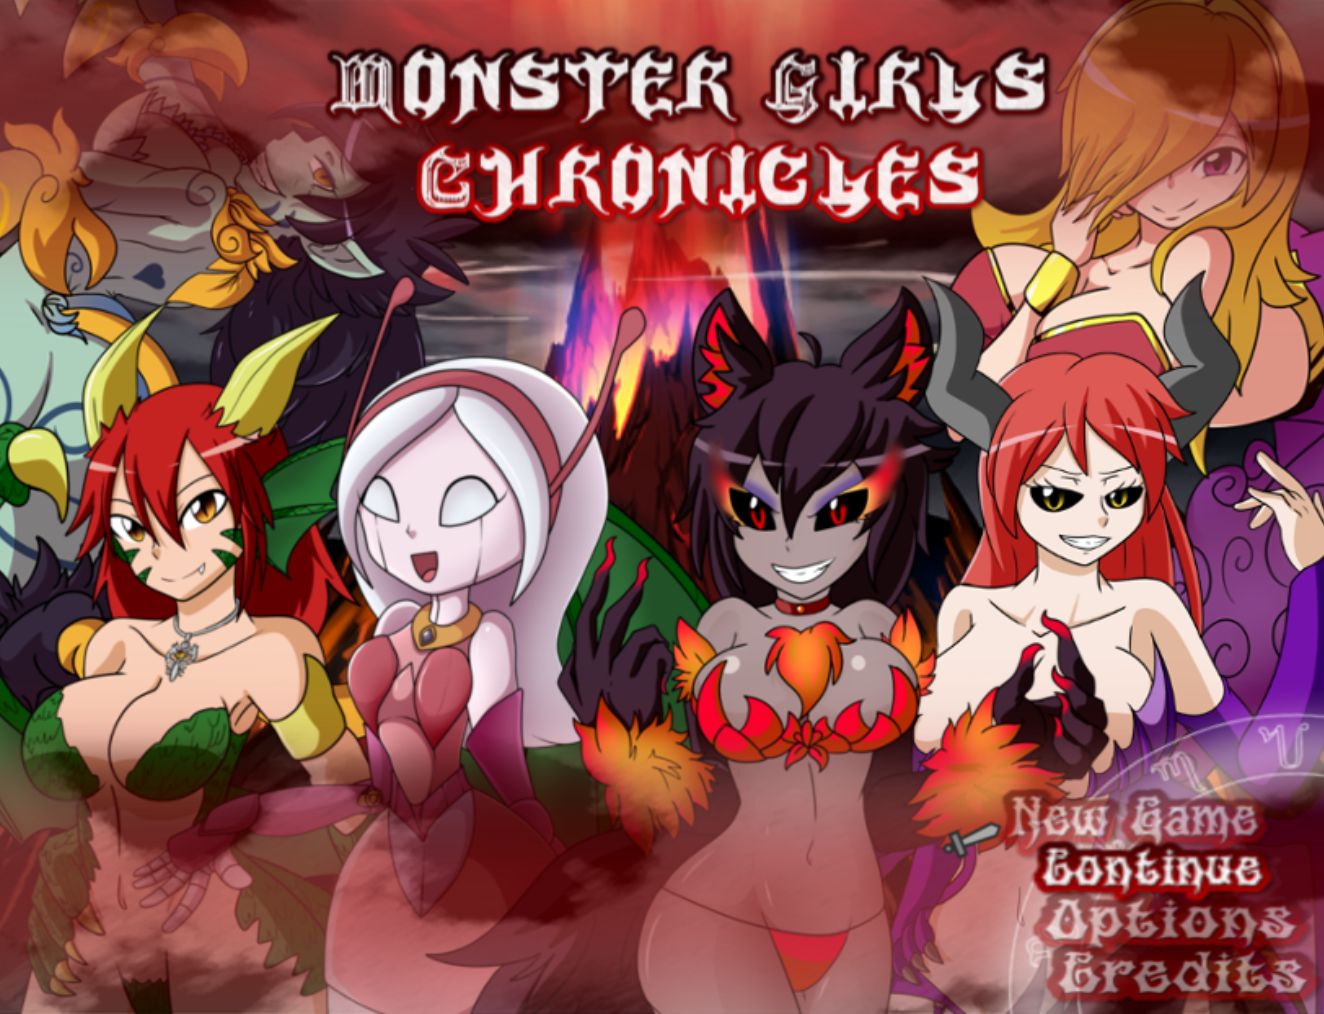 Watch Porn Image Monster Girls Chronicles v0.3 Demo - free game download, reviews ...